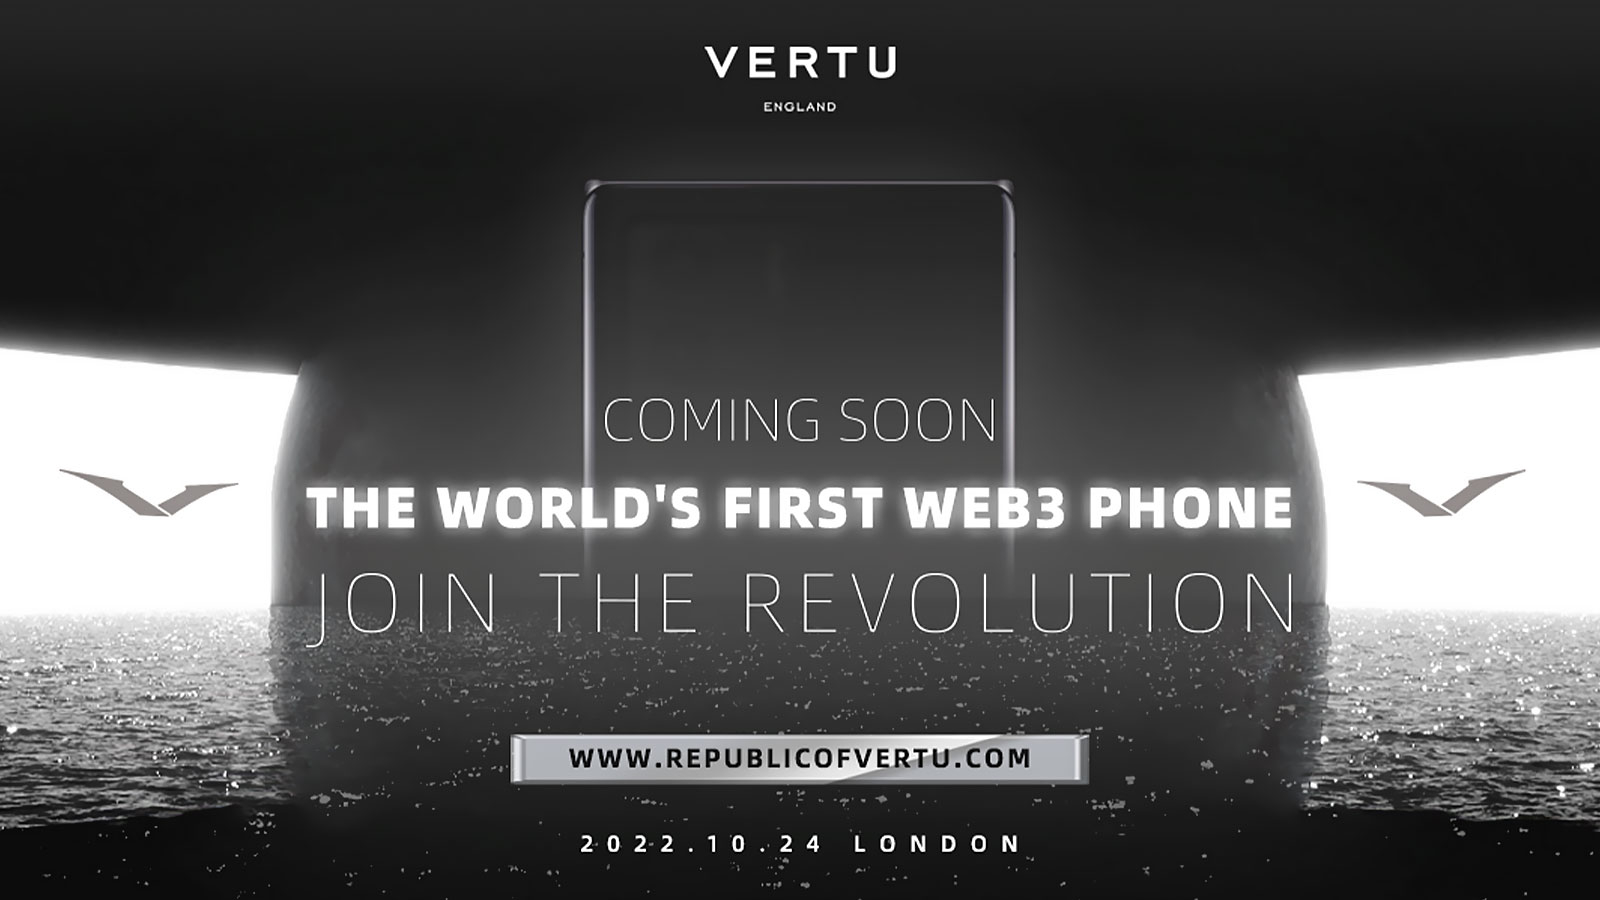 VERTU Debuts the World’s First WEB3 Phone, Flagship METAVERTU, to Make a New Decentralized Revolution